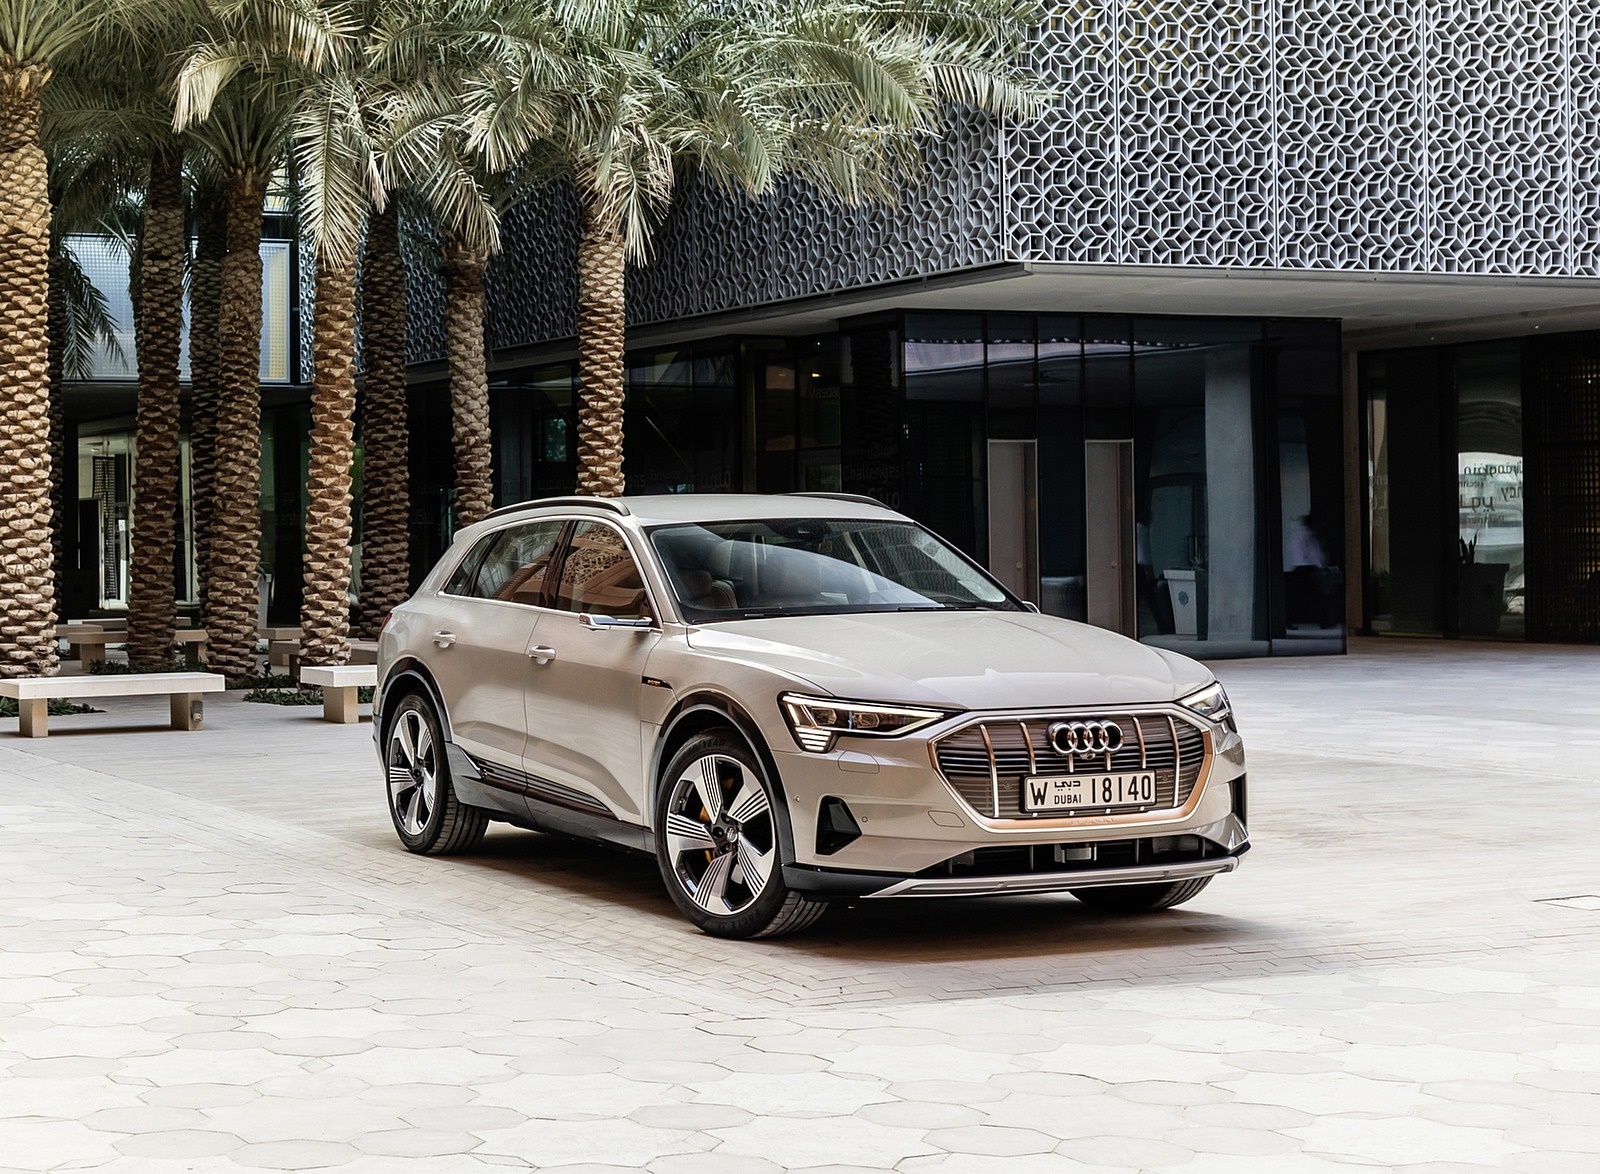 2019 Audi e-tron (Color: Siam Beige) Front Three-Quarter Wallpapers #178 of 234